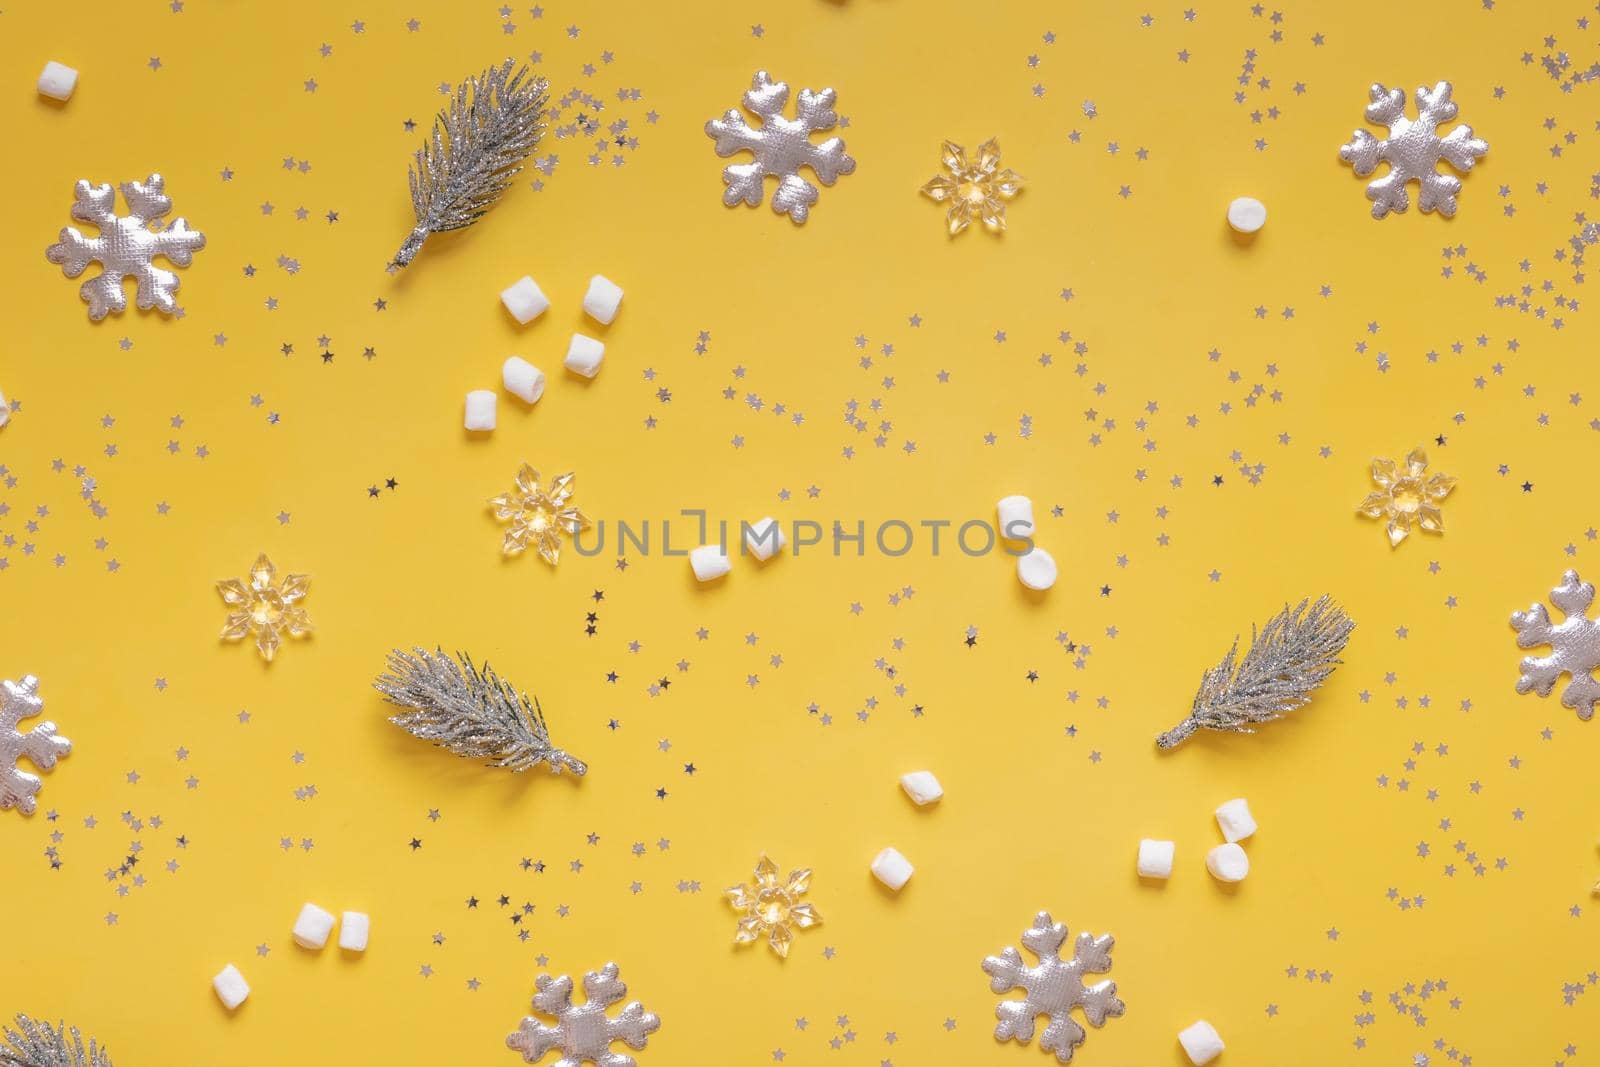 Snowflakes, marsh-mellow and Christmas decorations on colored background top view. Christmas mock up by ssvimaliss